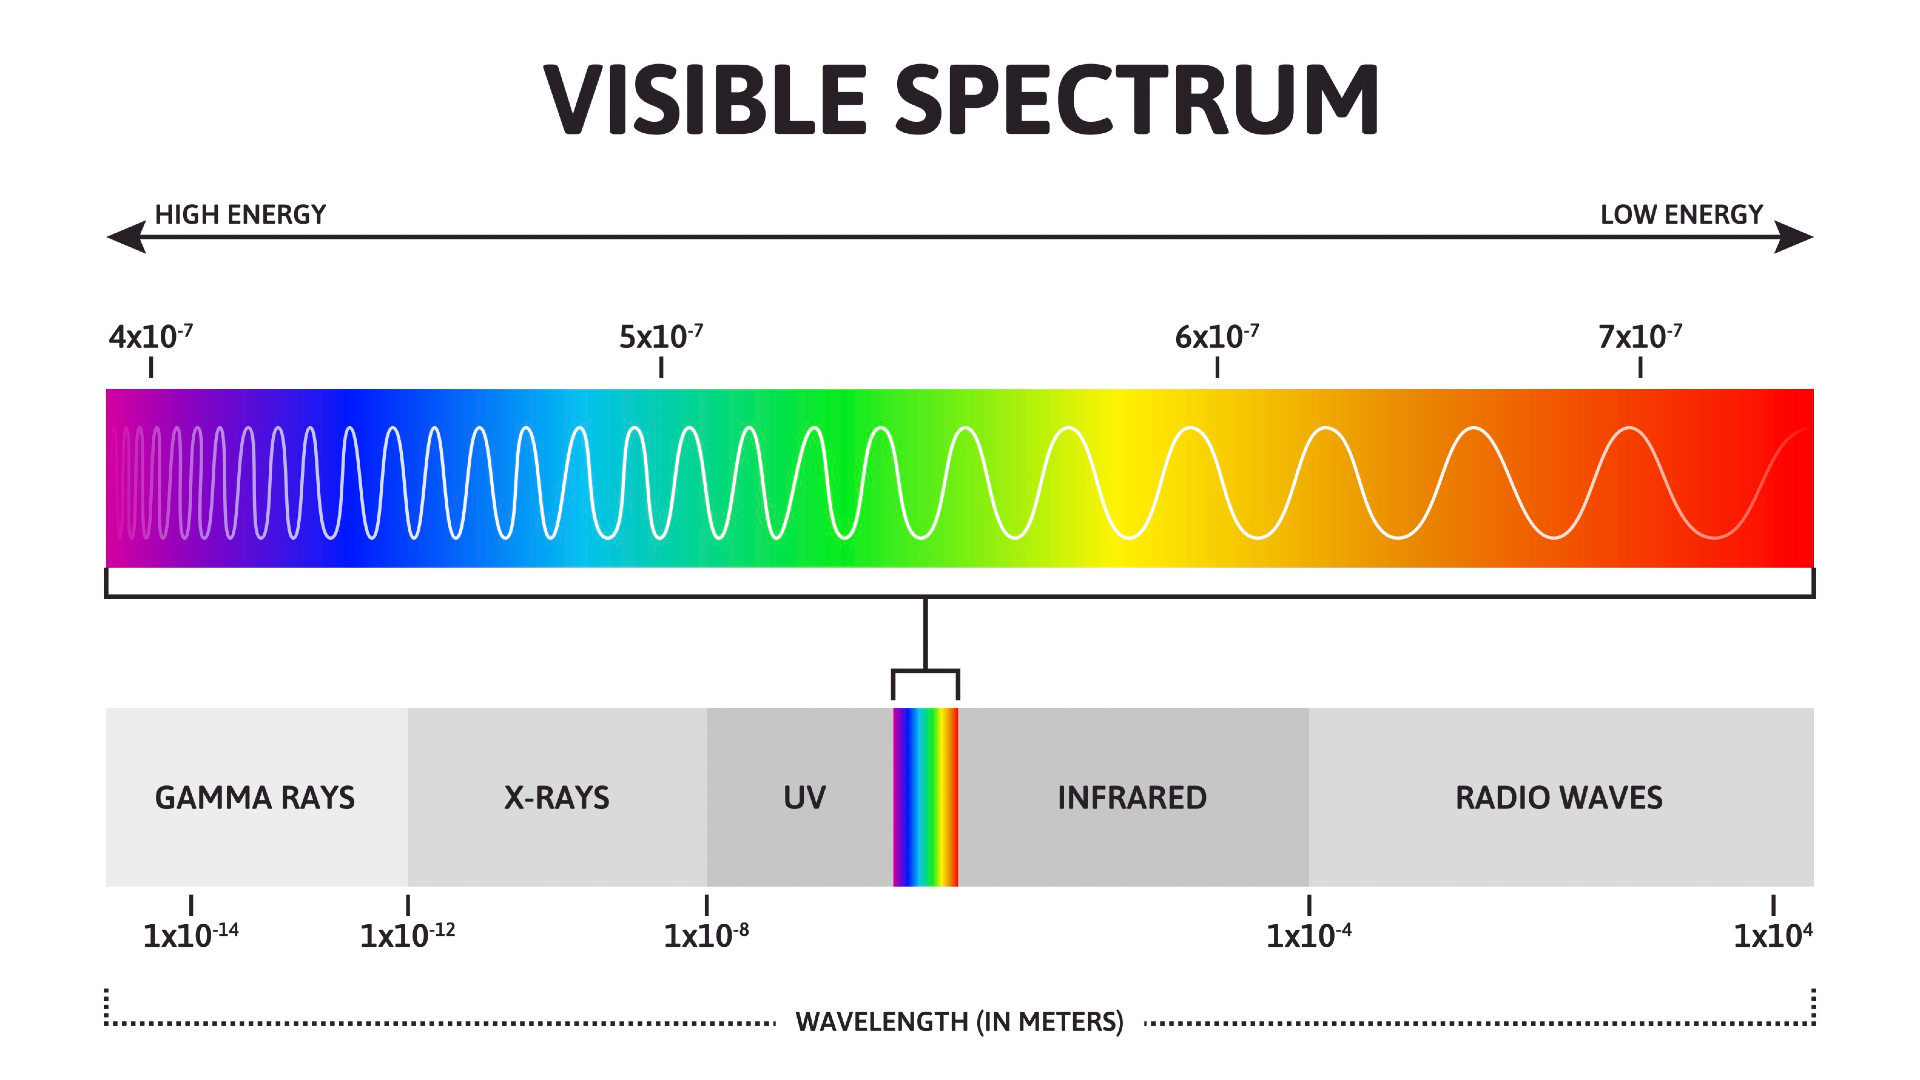 Histogram of the visible color spectrum. From left (high energy) to right (low energy), it travels gamma rays, X-rays, UV, infrared, and then radio waves.